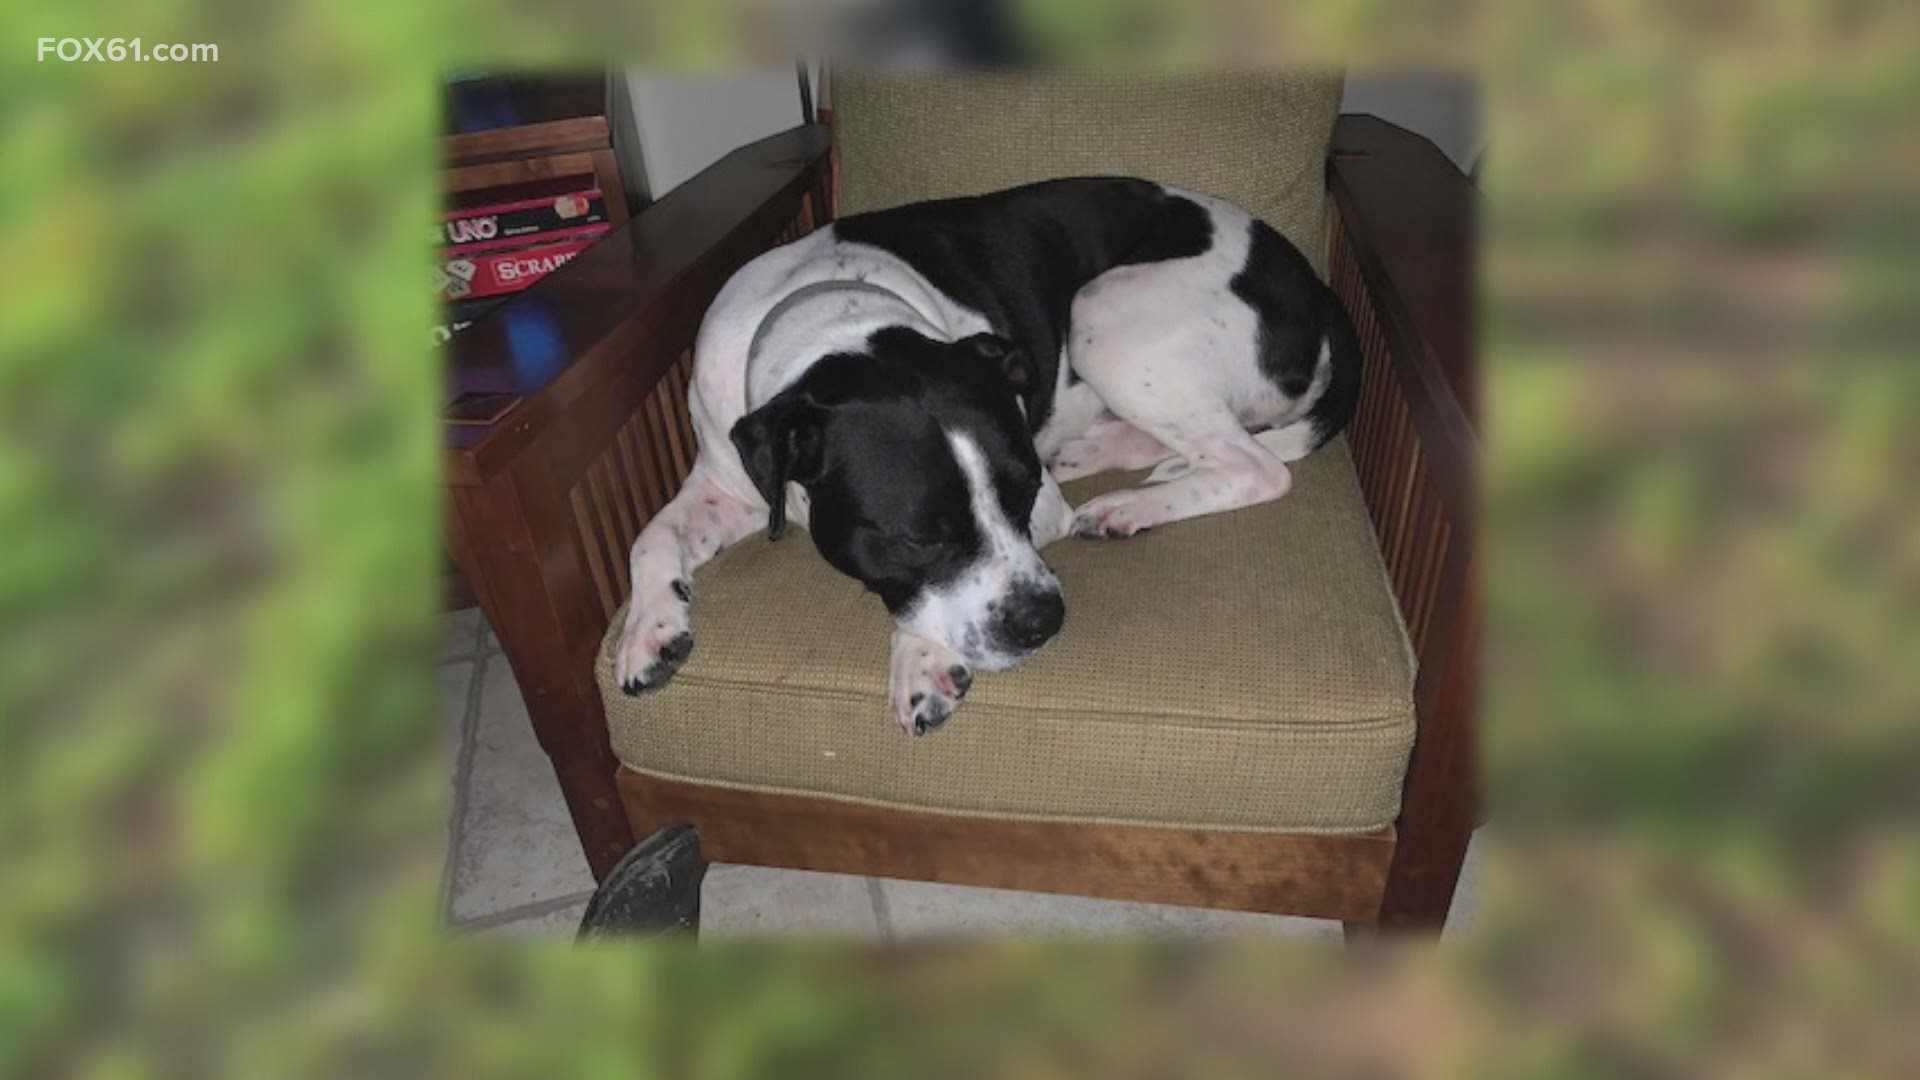 The pit bull named Dexter allegedly attacked a 95-year-old woman at their home on Thrall Avenue.